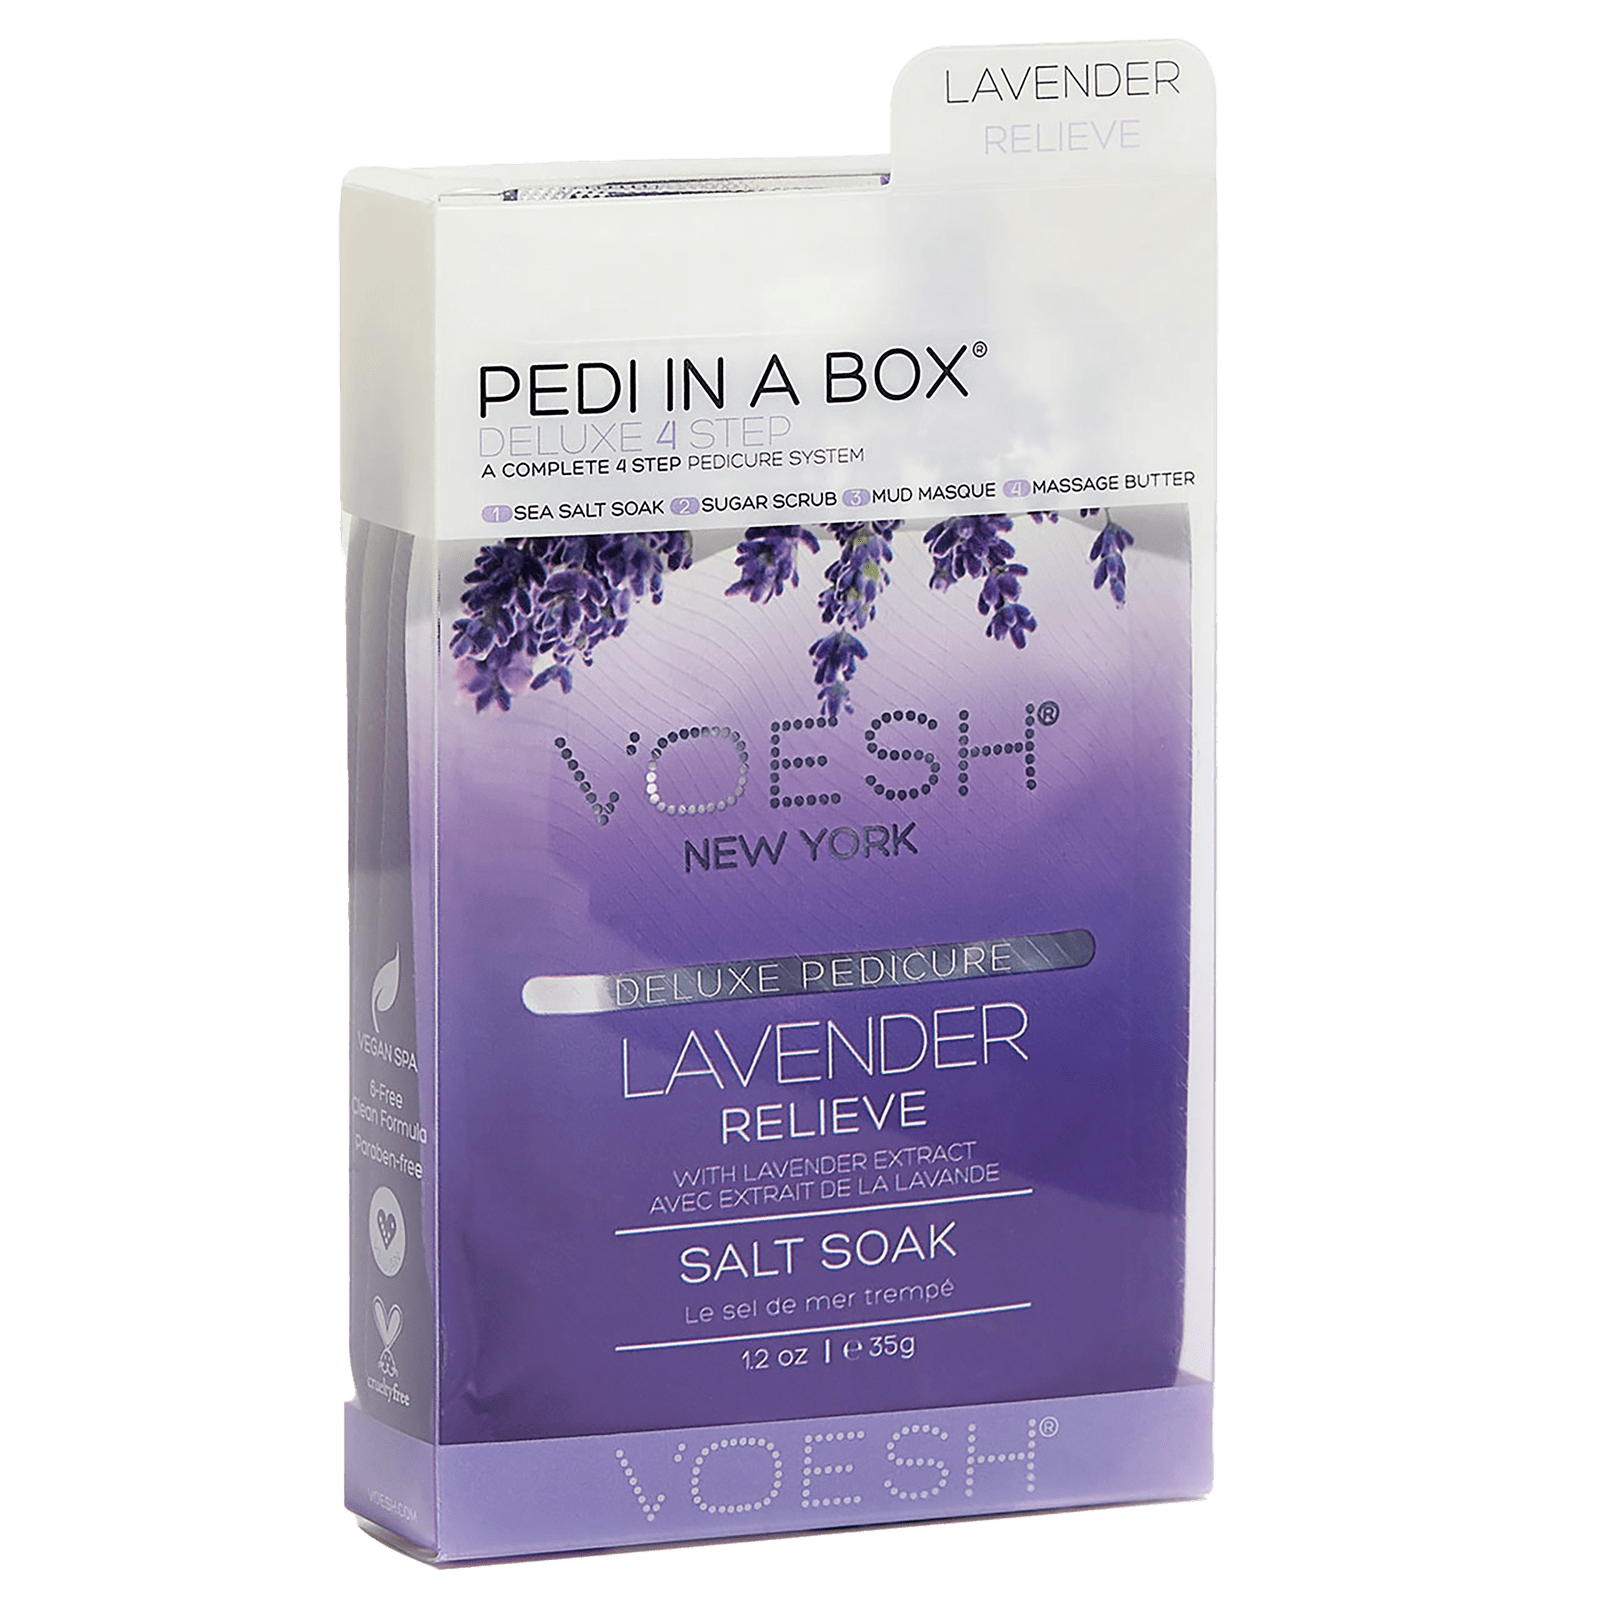 Voesh - Pedi in a Box Deluxe 4 Step | Lavender Relieve - Pack